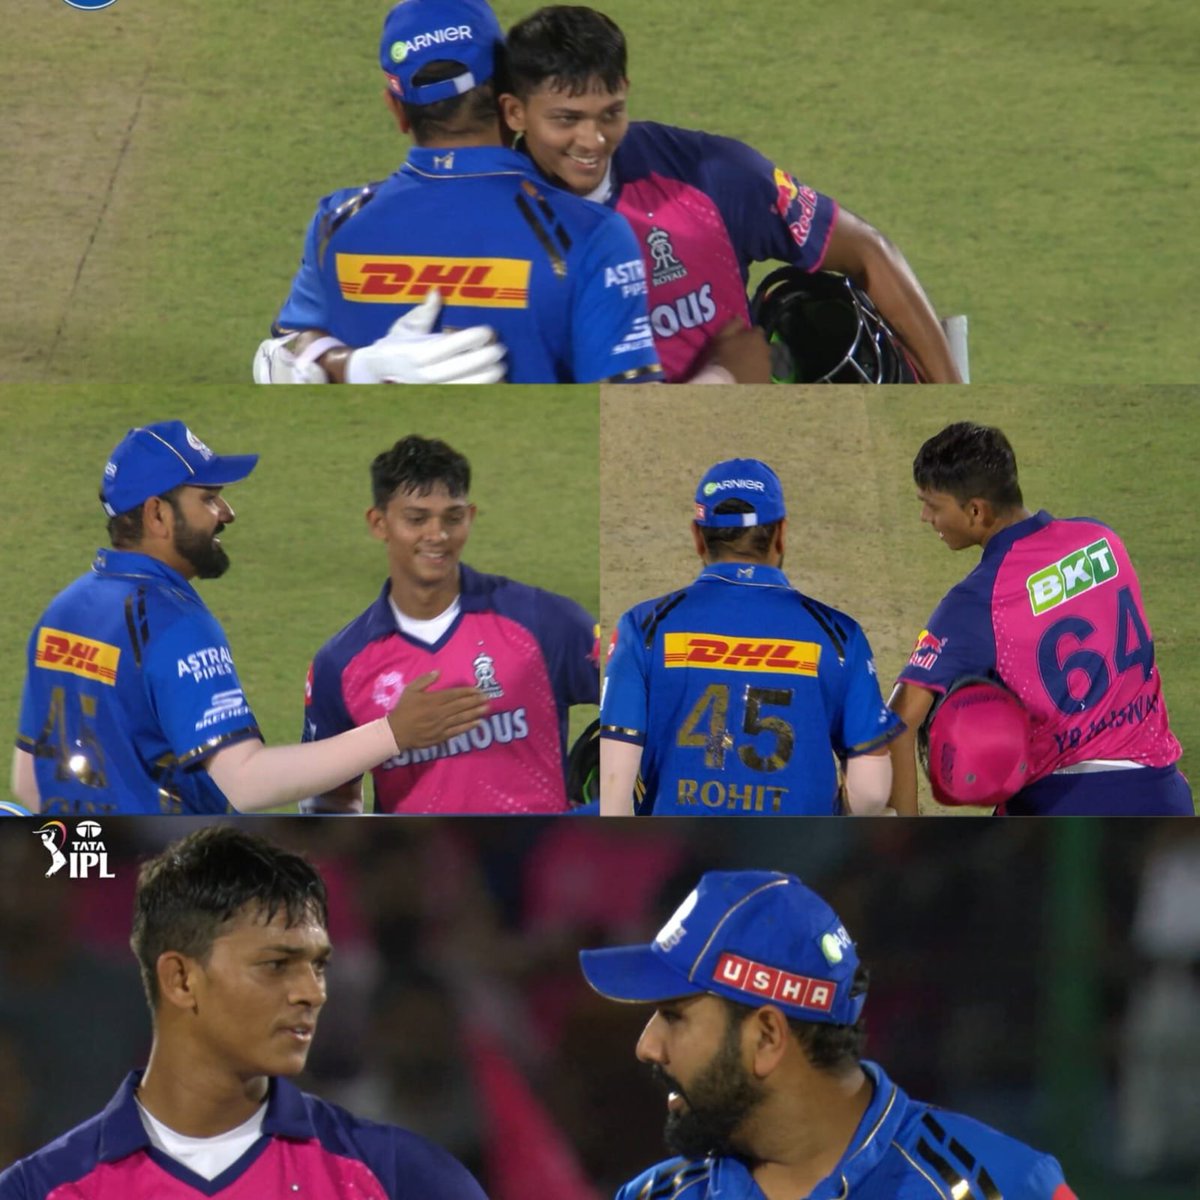 Rohit - Jaiswal moment. 🌟 - Waiting for Brothers of destruction opening together for India.